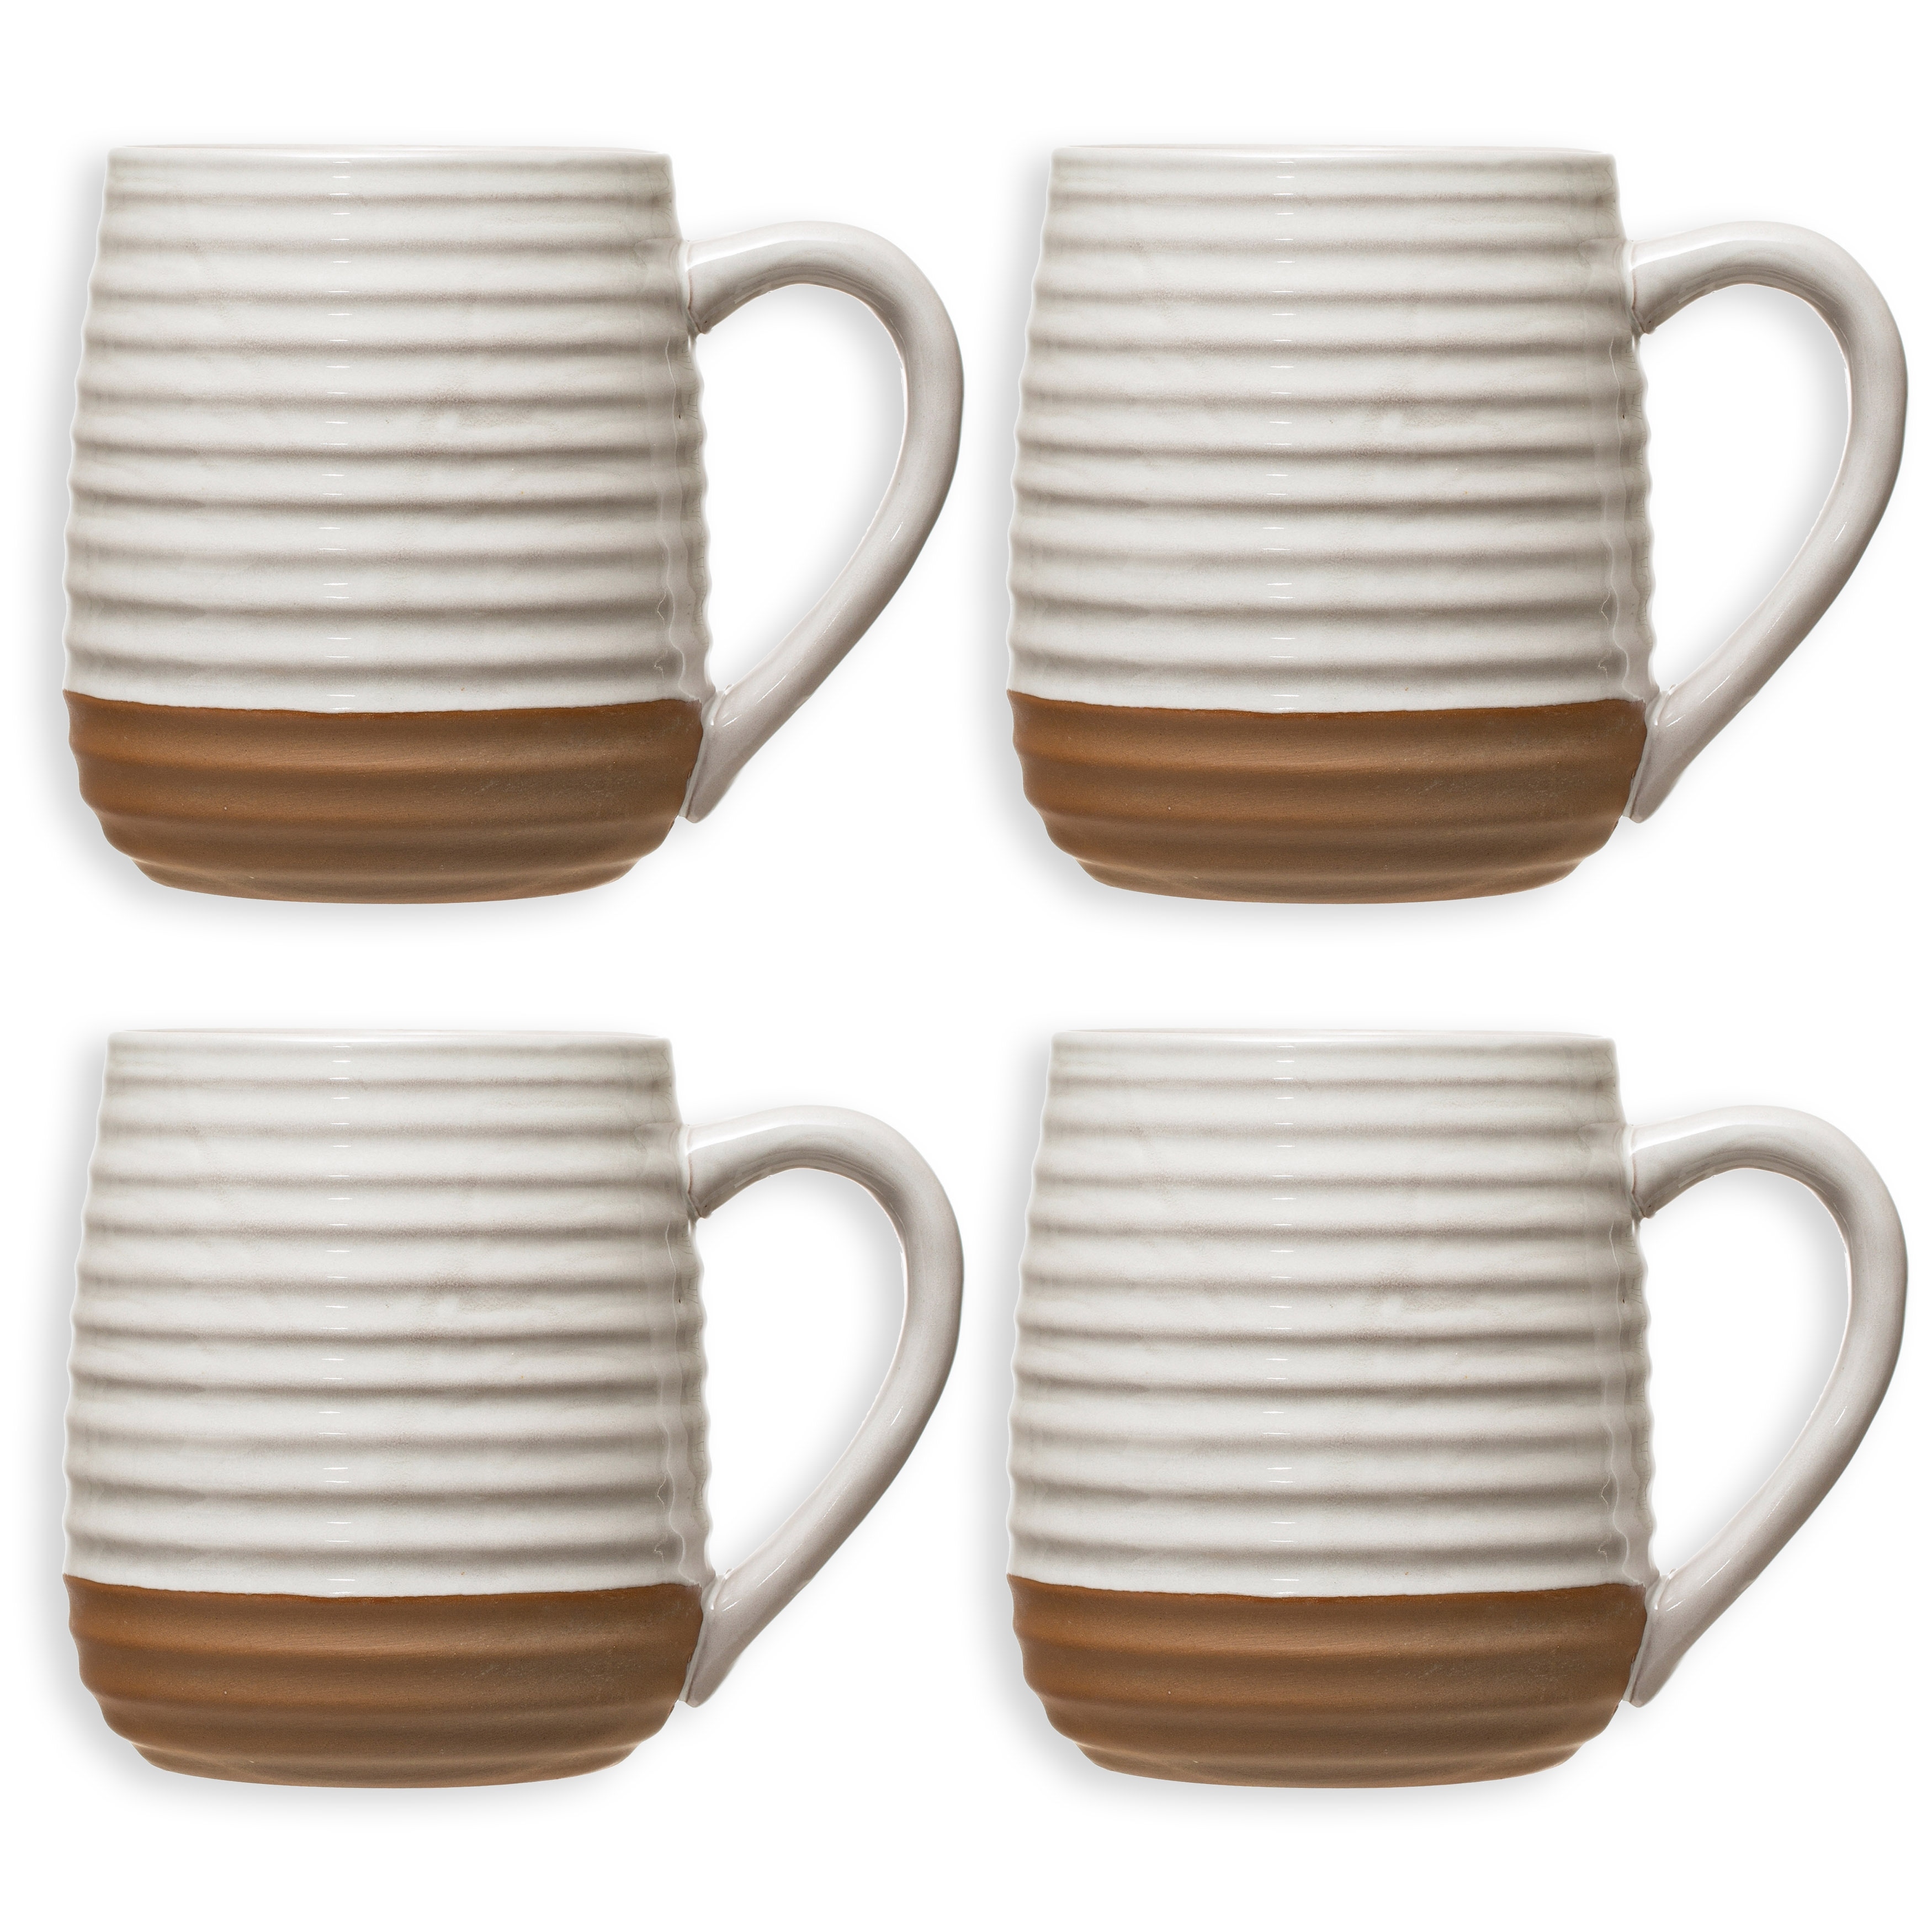 https://ak1.ostkcdn.com/images/products/is/images/direct/eed11b94dccc033907ffe760220c22d2426c4449/Rustic-Stoneware-Mugs-with-White-Ribbed-Design%2C-Set-of-4.jpg